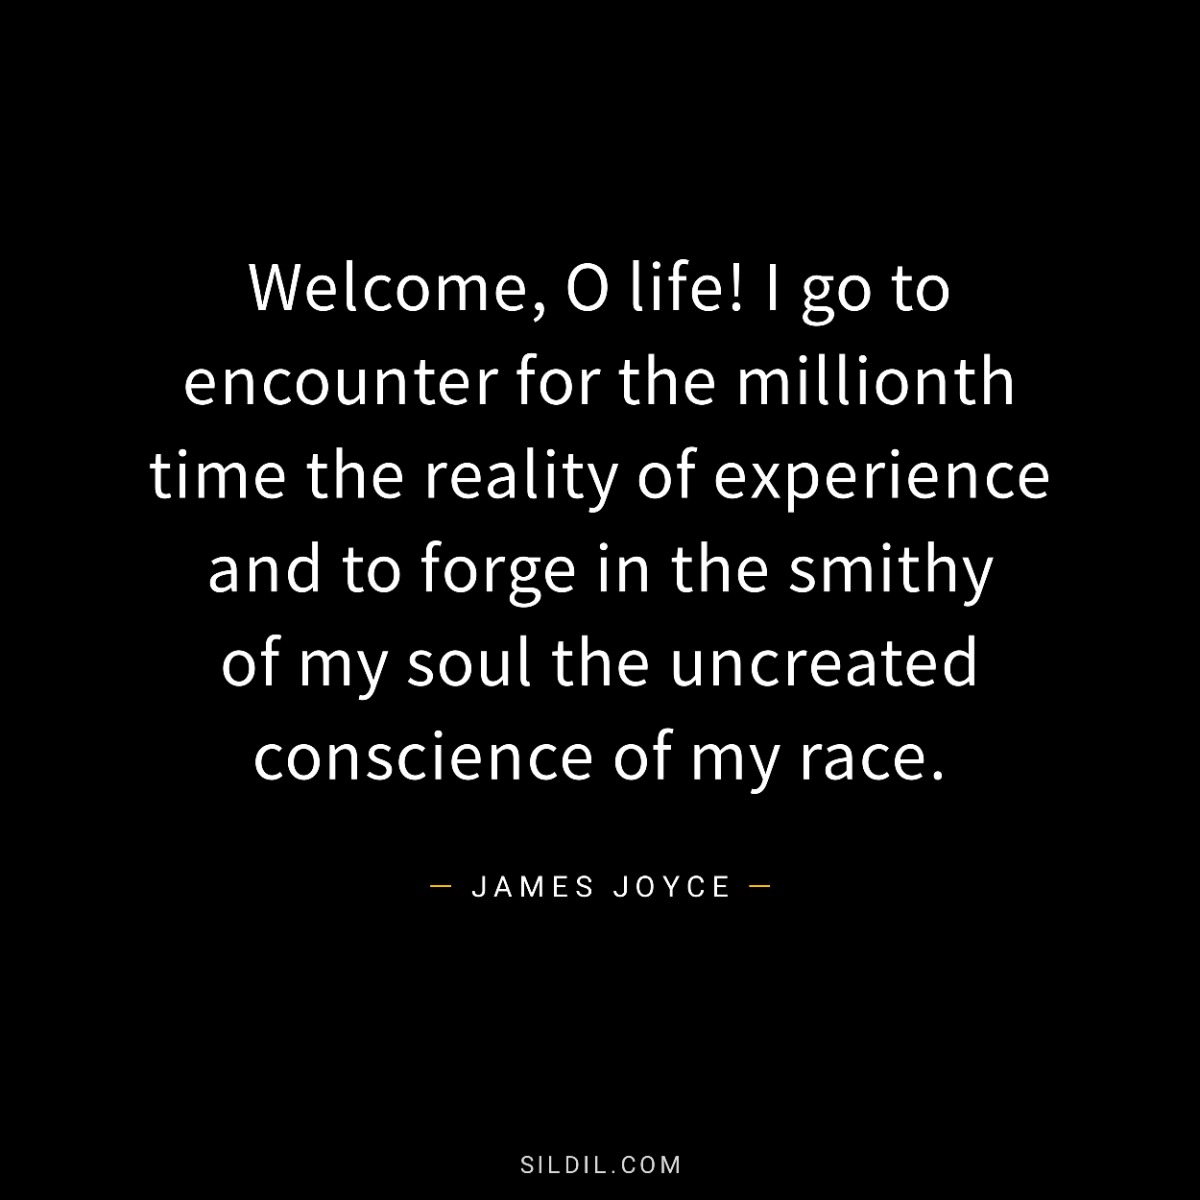 Welcome, O life! I go to encounter for the millionth time the reality of experience and to forge in the smithy of my soul the uncreated conscience of my race.